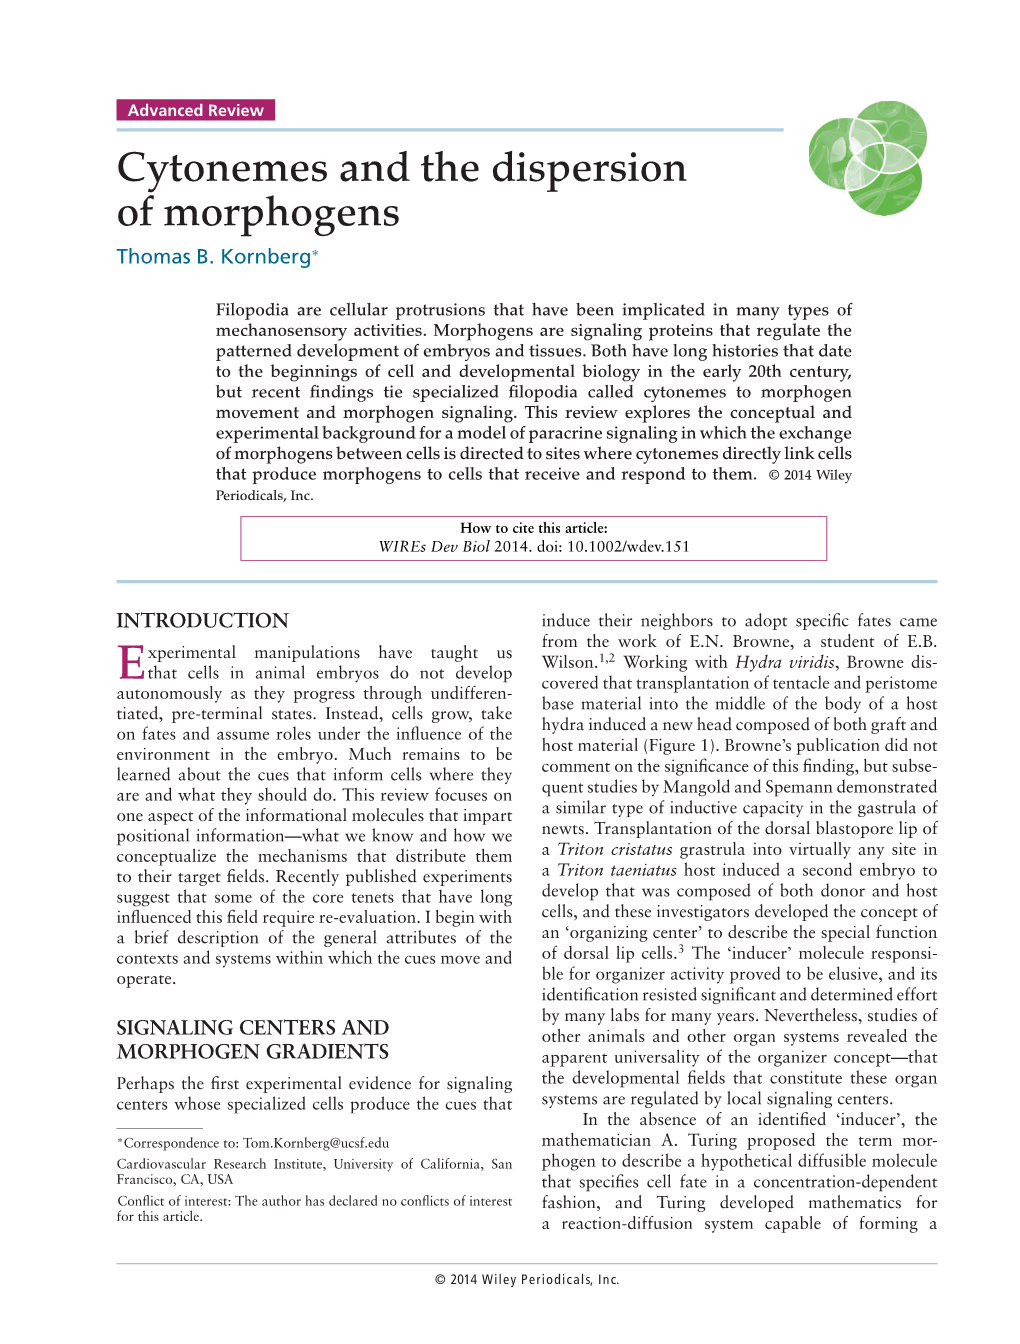 Cytonemes and the Dispersion of Morphogens Thomas B